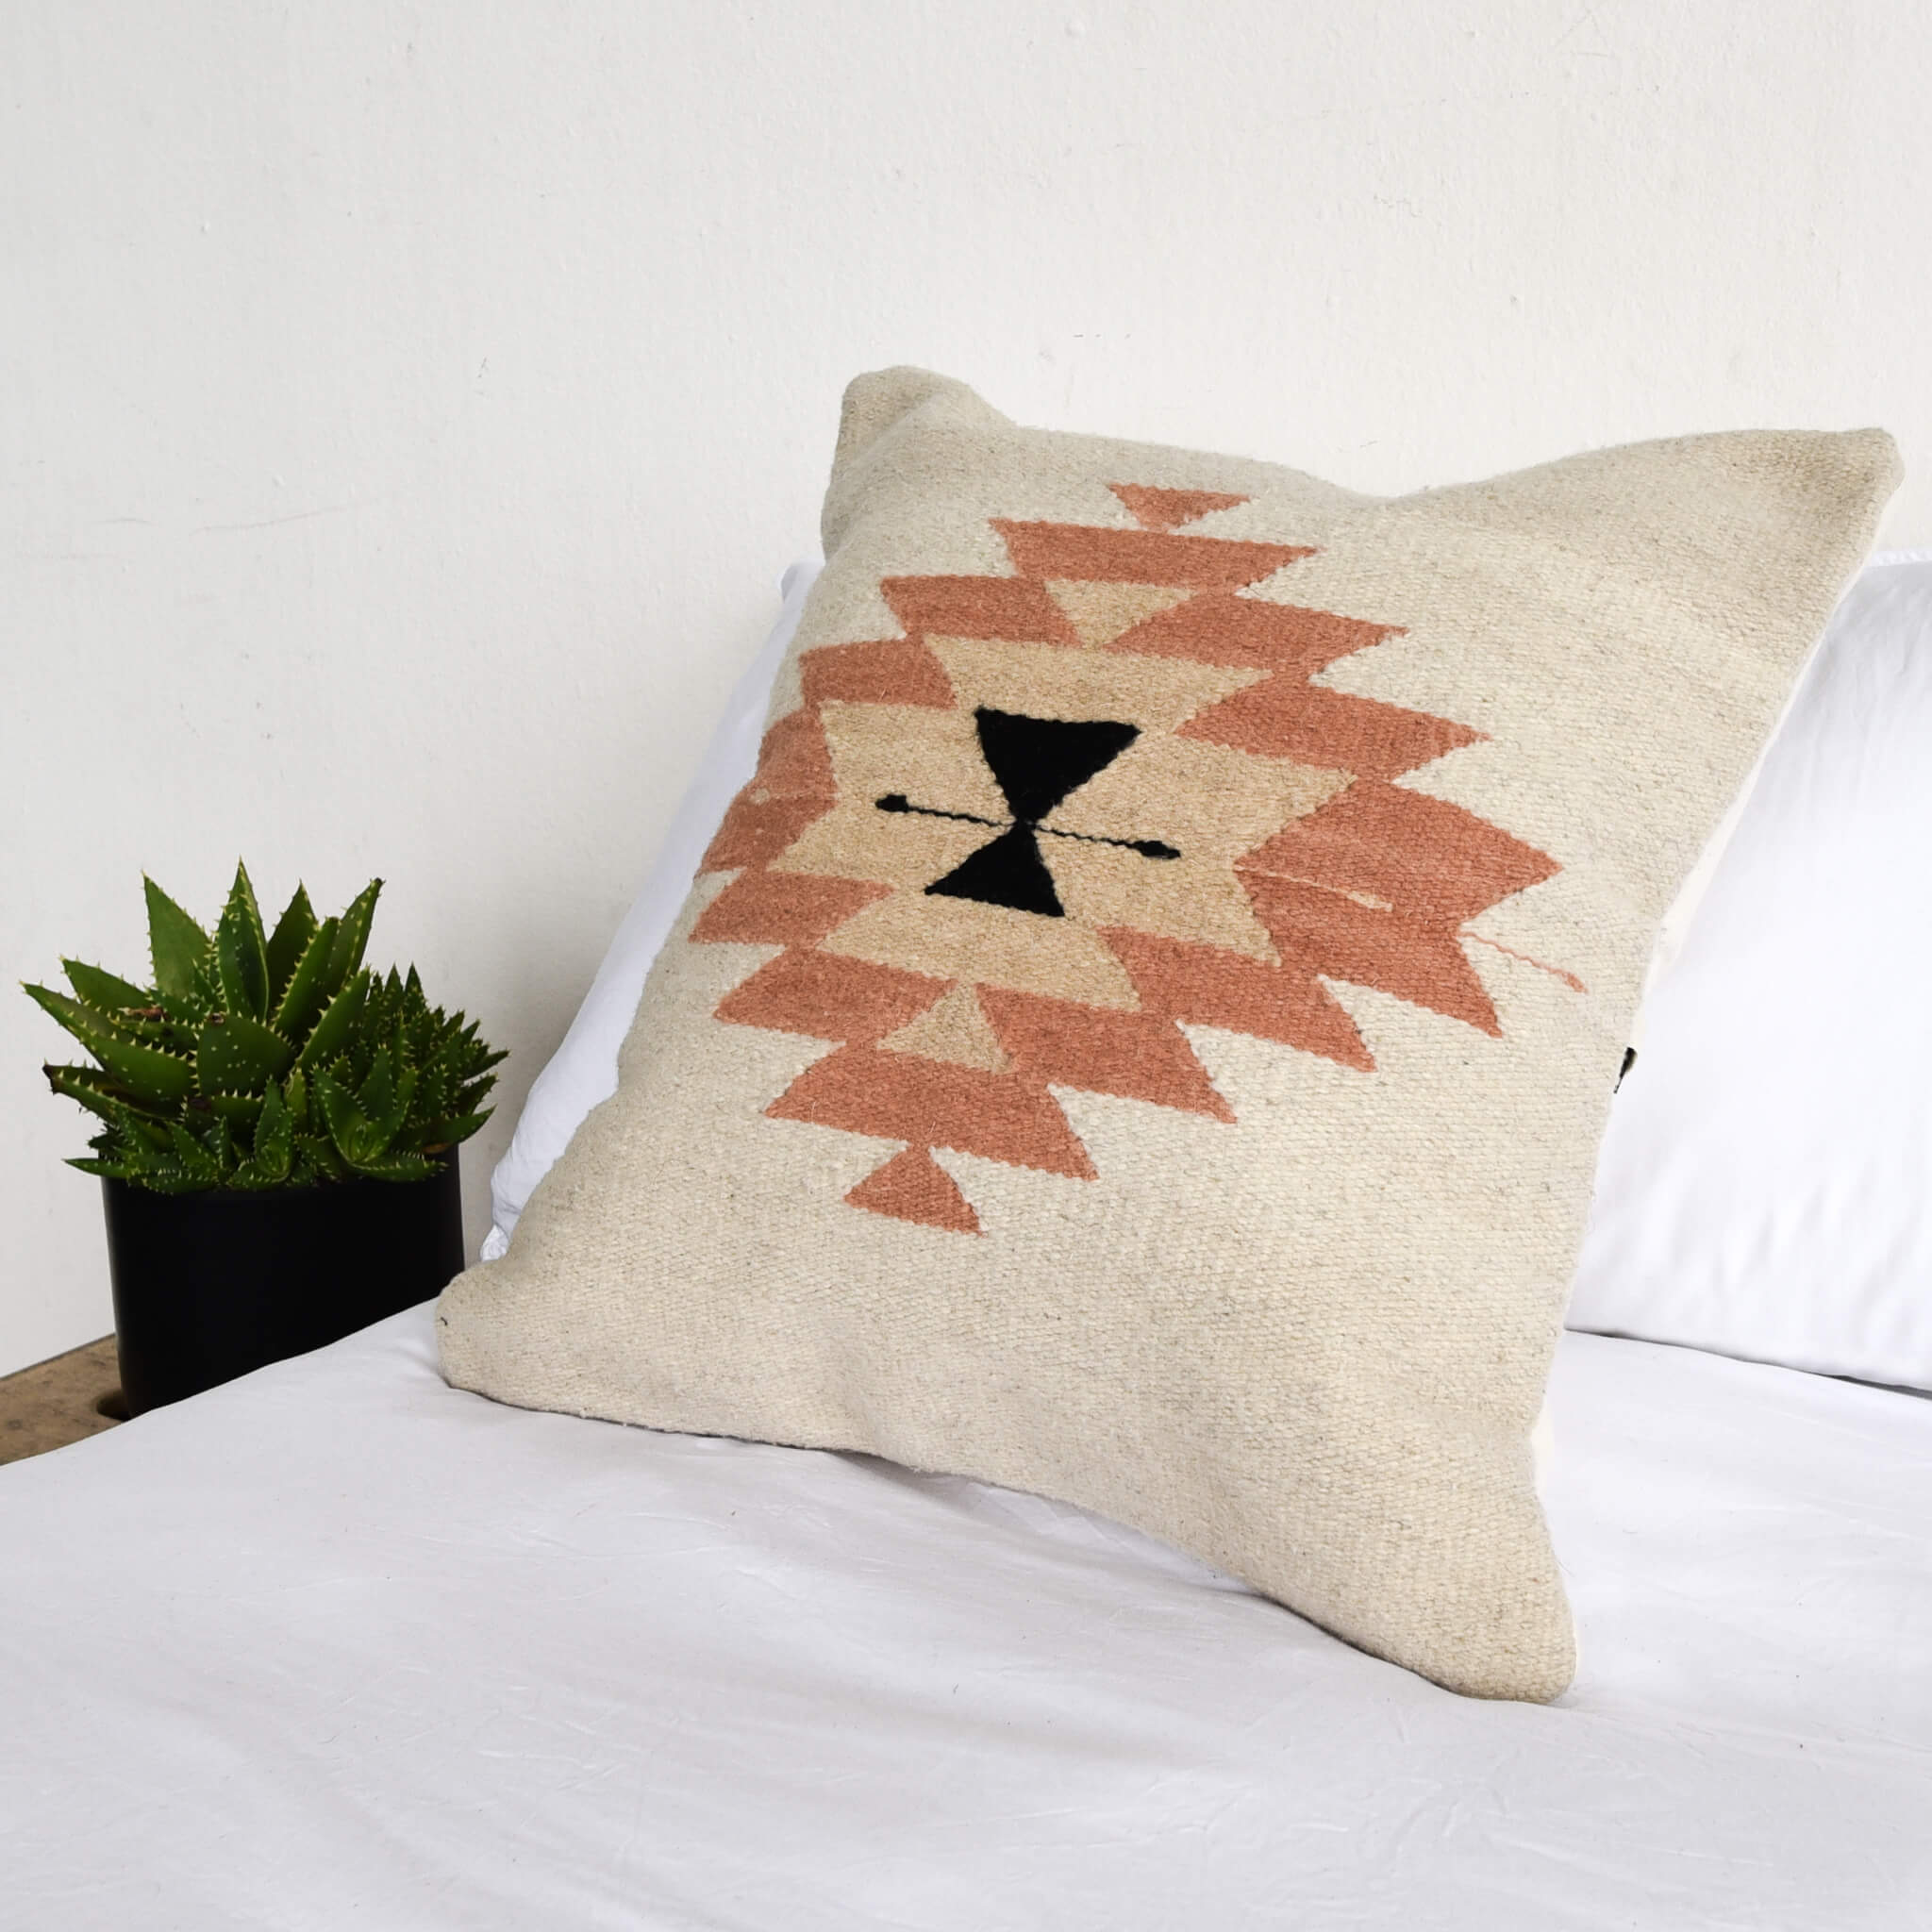 A wool throw pillow made in Oaxaca featuring a Zapotec inspired design.